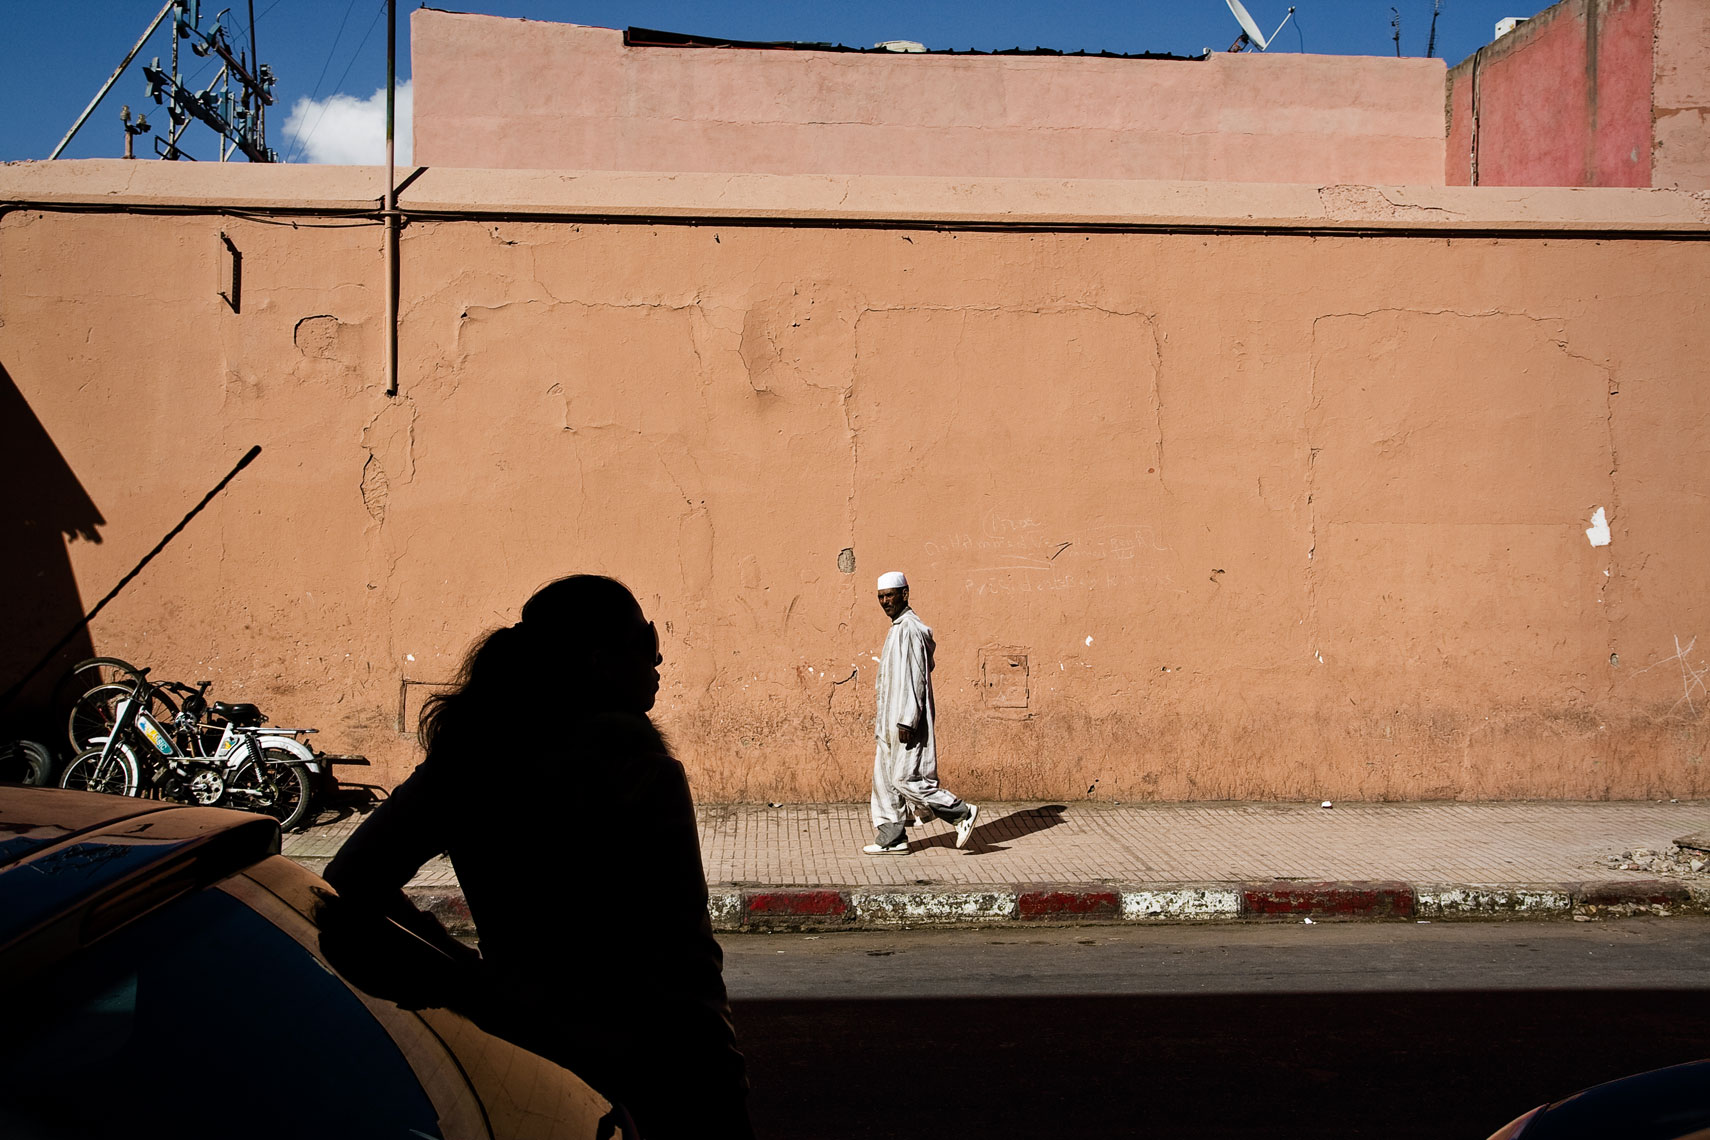 MOROCCO. Marrakech, May 2013. Inside the Medina (the old town).